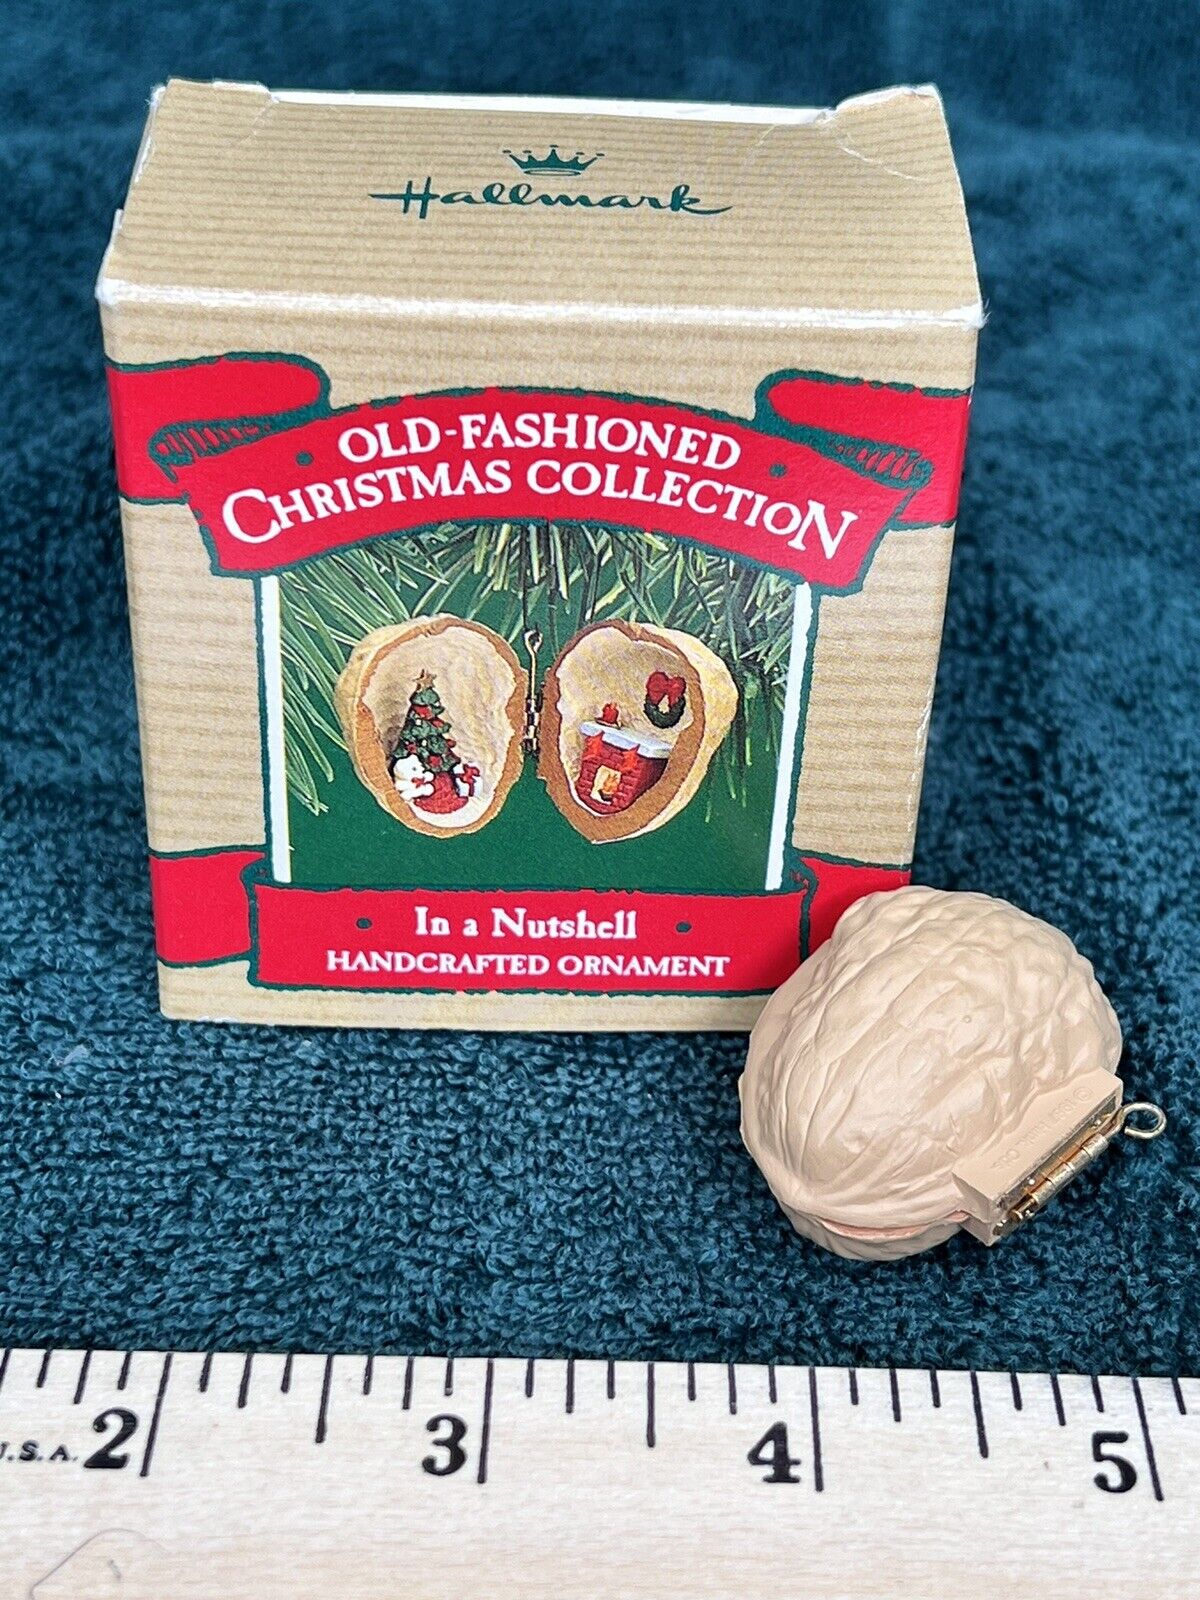 1987 Hallmark Ornament “In A Nutshell” Old Fashioned Christmas Collection 